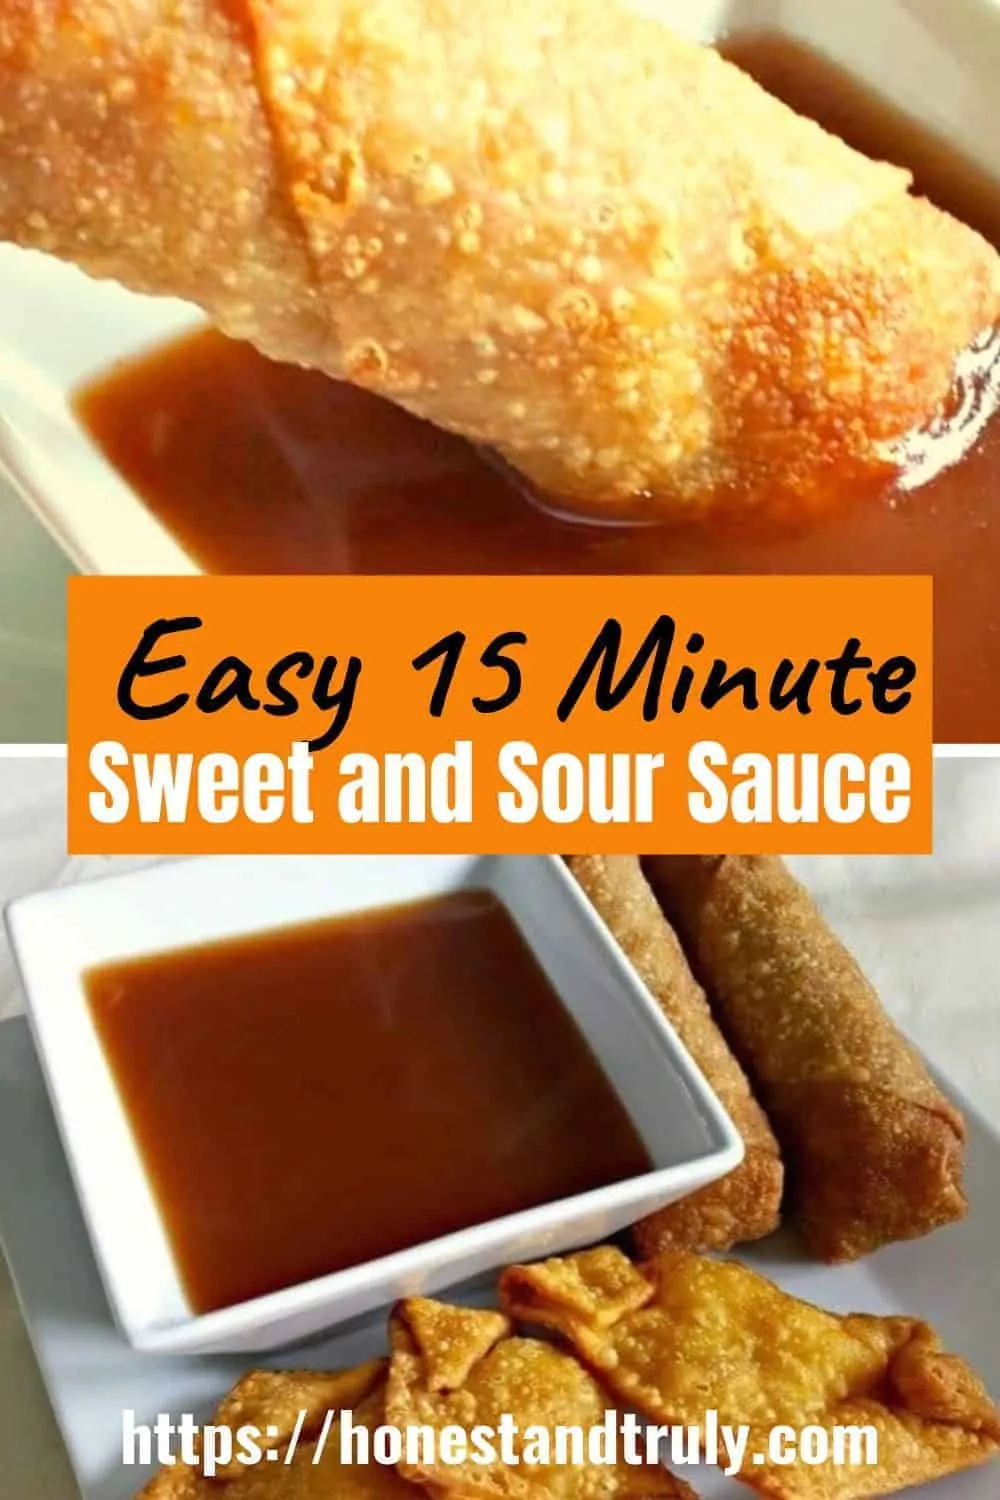 Easy sweet and sour sauce